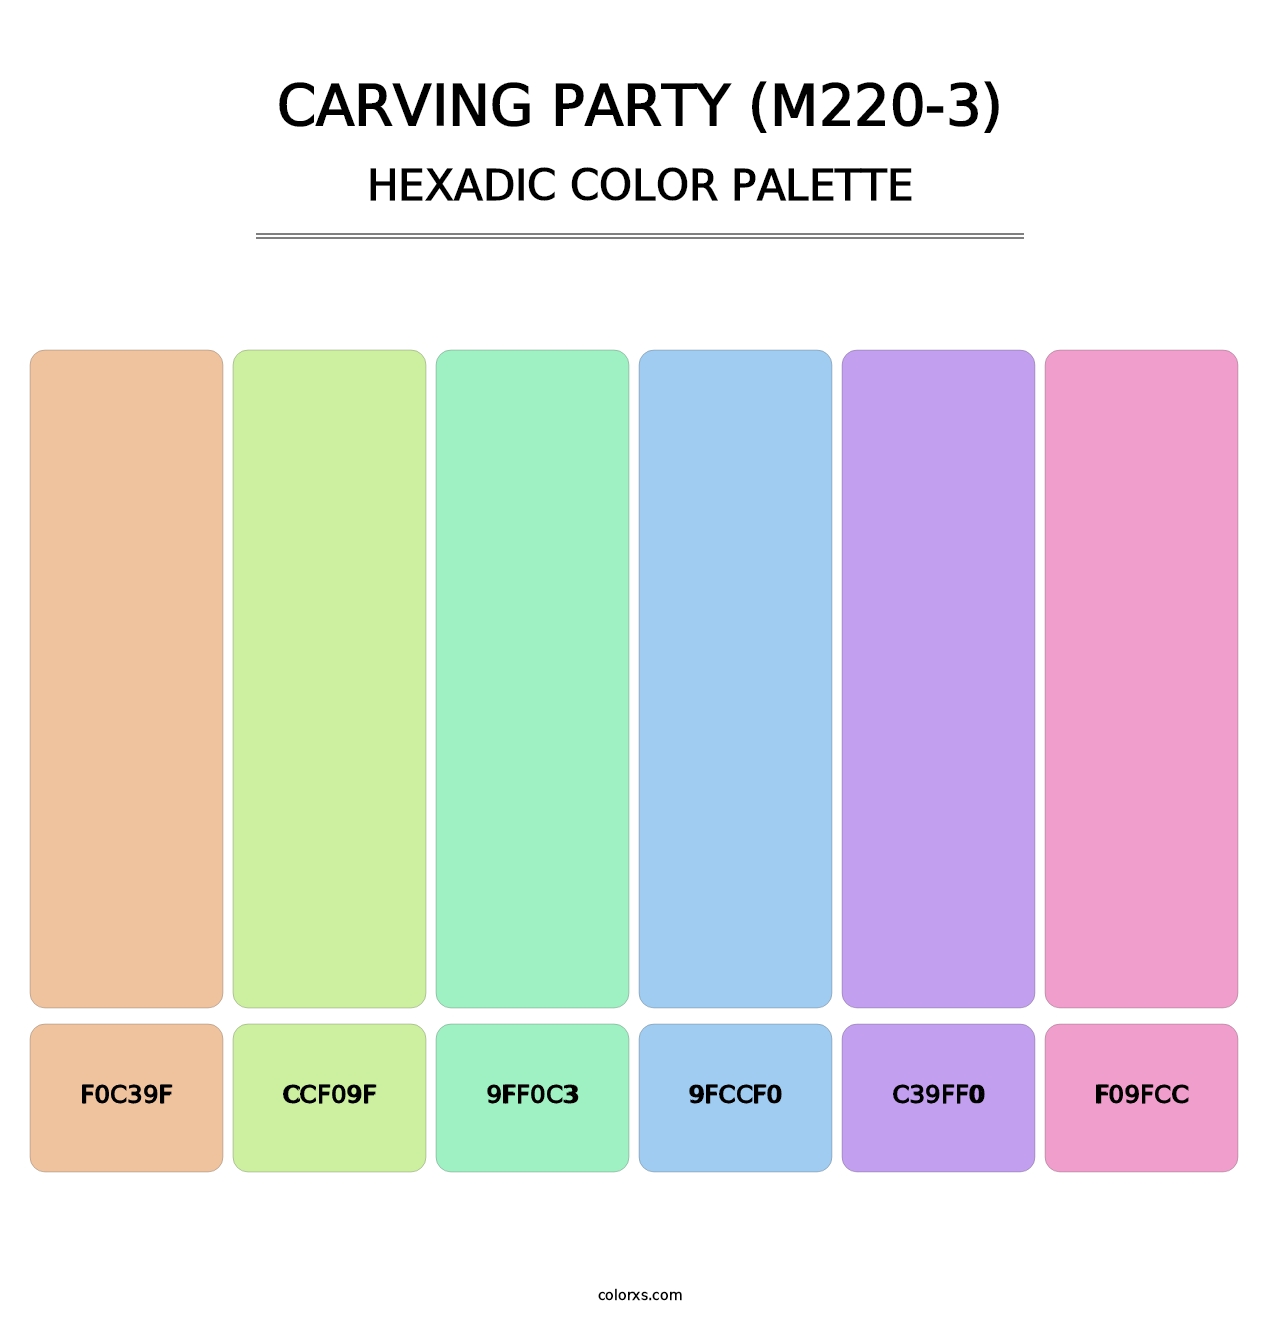 Carving Party (M220-3) - Hexadic Color Palette